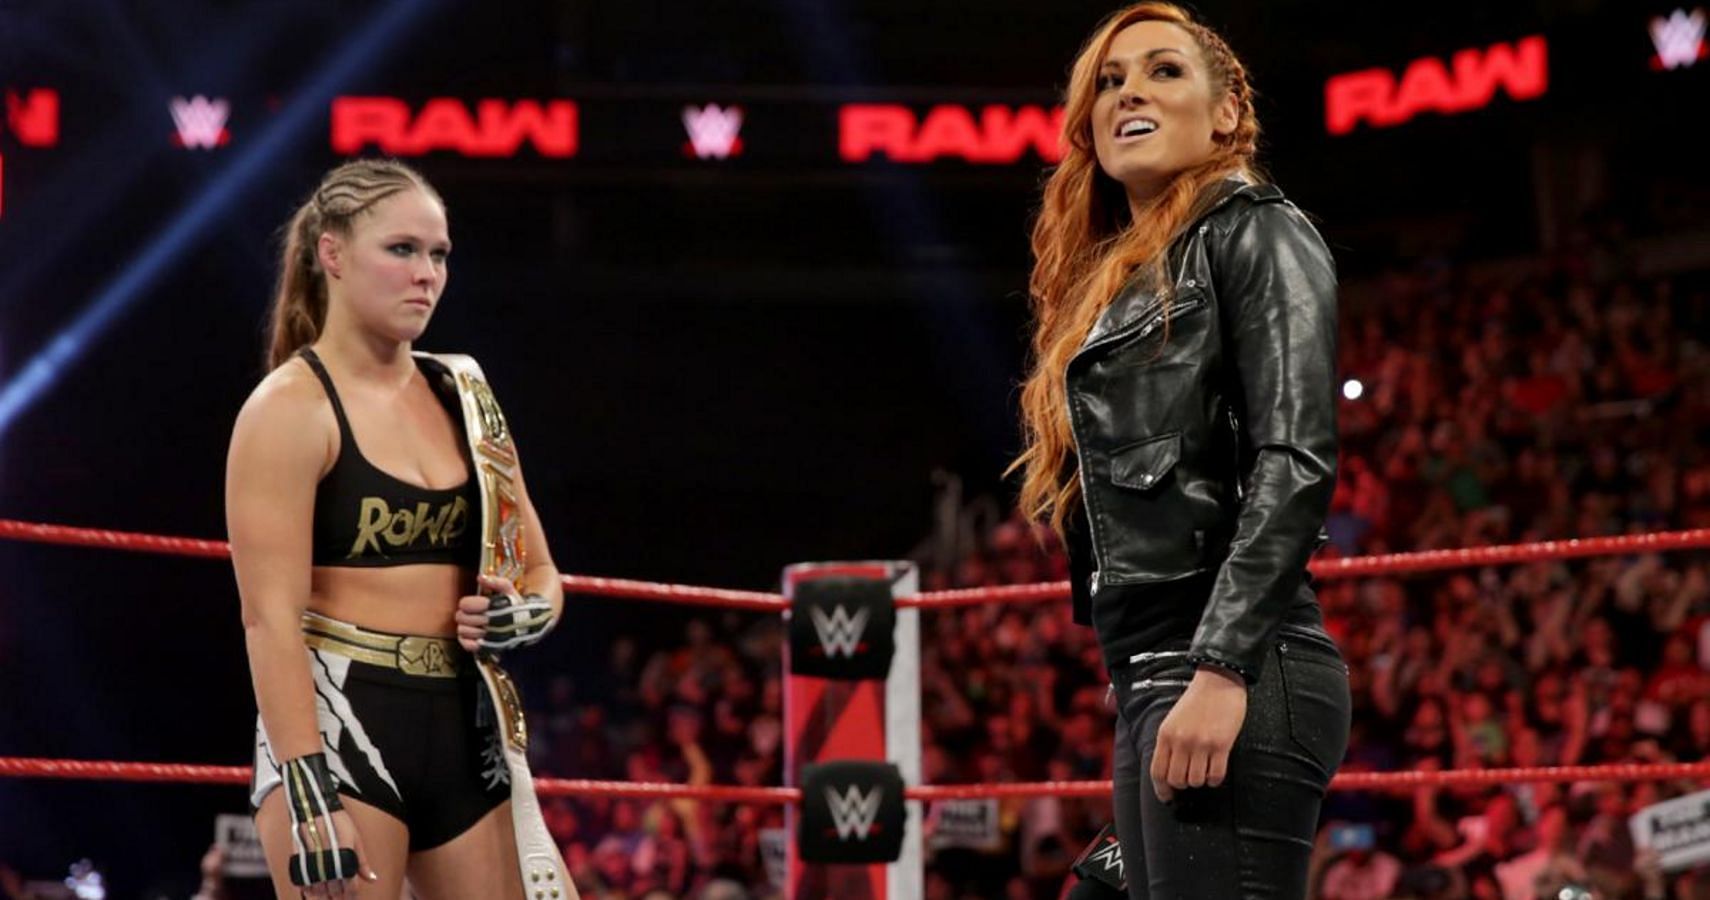 Becky Lynch and Ronda Rousey trading words on WWE RAW